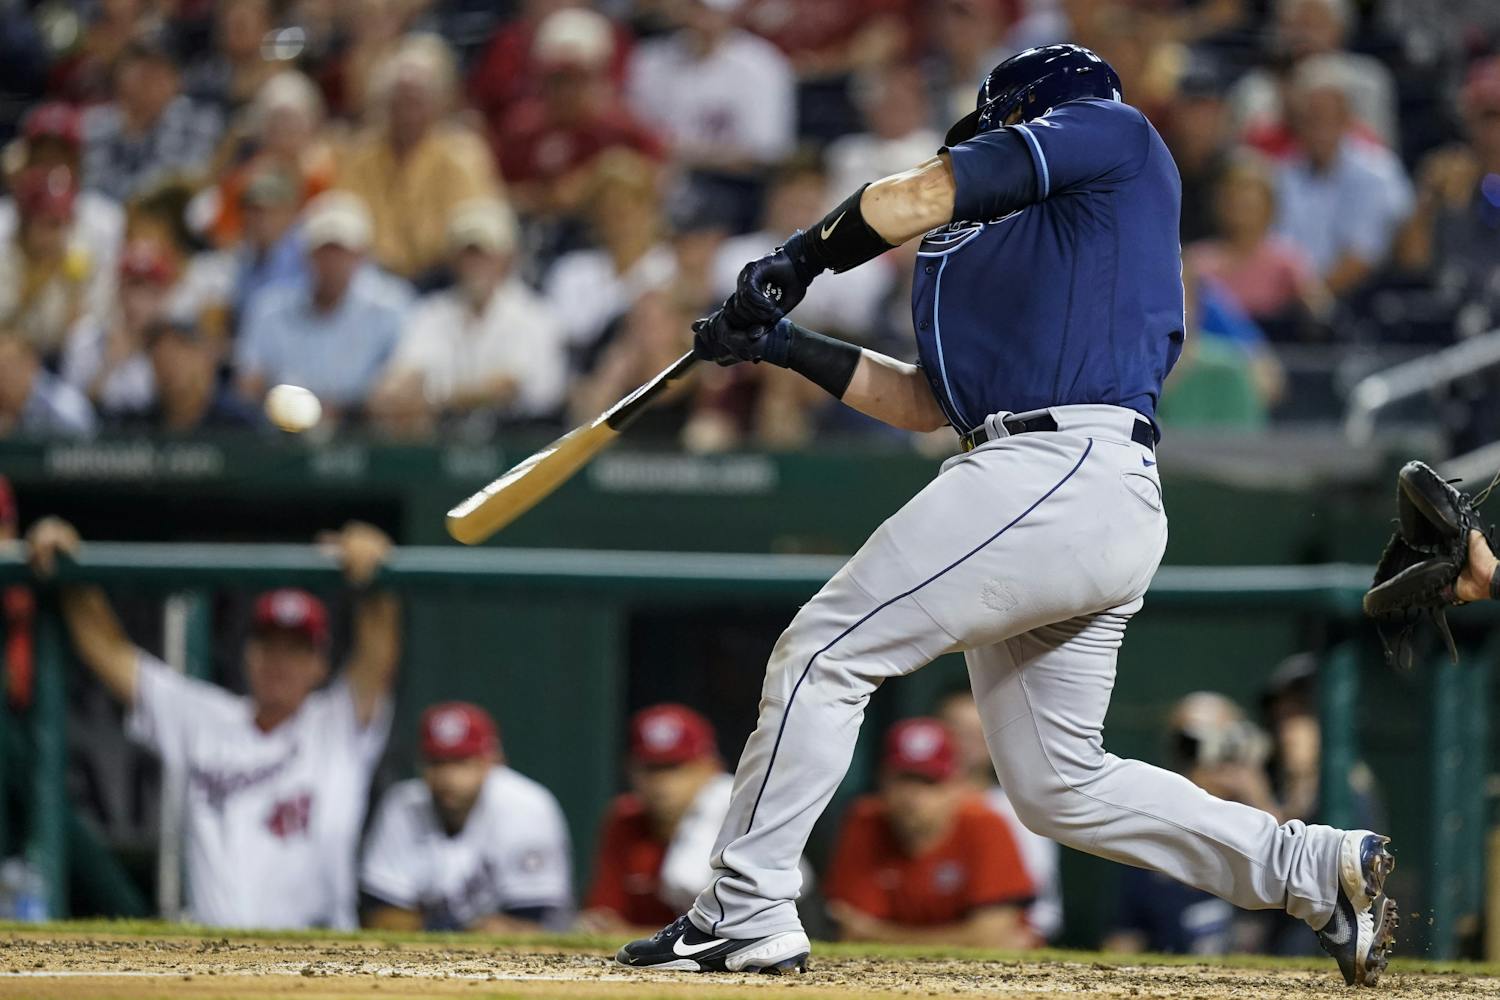 Tampa Bay Rays' Mike Zunino hits a solo home run during the ninth inning of a baseball game against the Washington Nationals at Nationals Park, Tuesday, June 29, 2021, in Washington. (AP Photo/Alex Brandon)